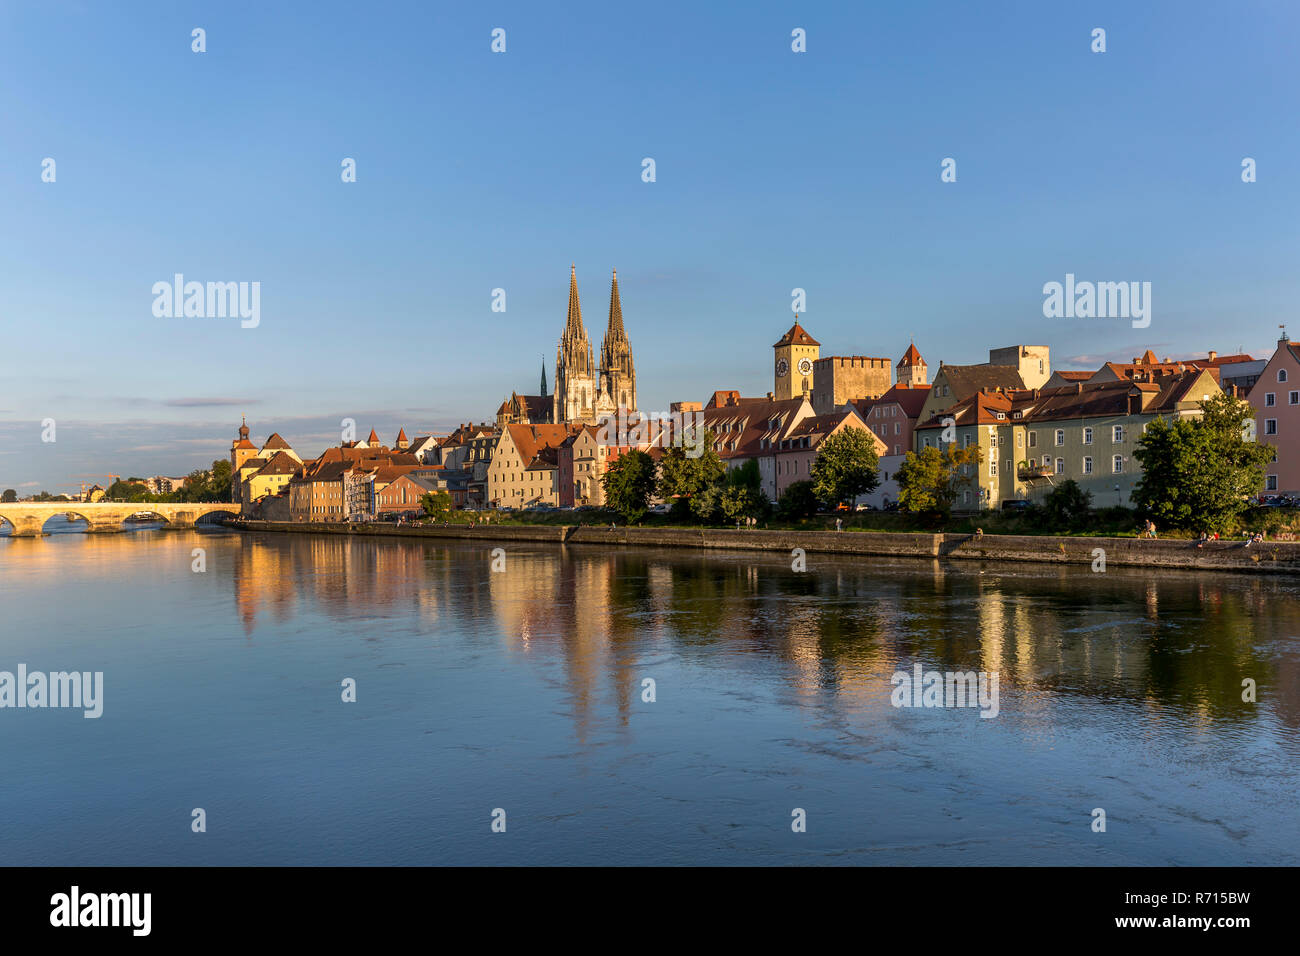 Old Town with the Stone Bridge and St. Peter's Cathedral on the Danube River, Regensburg, Bavaria, Germany Stock Photo